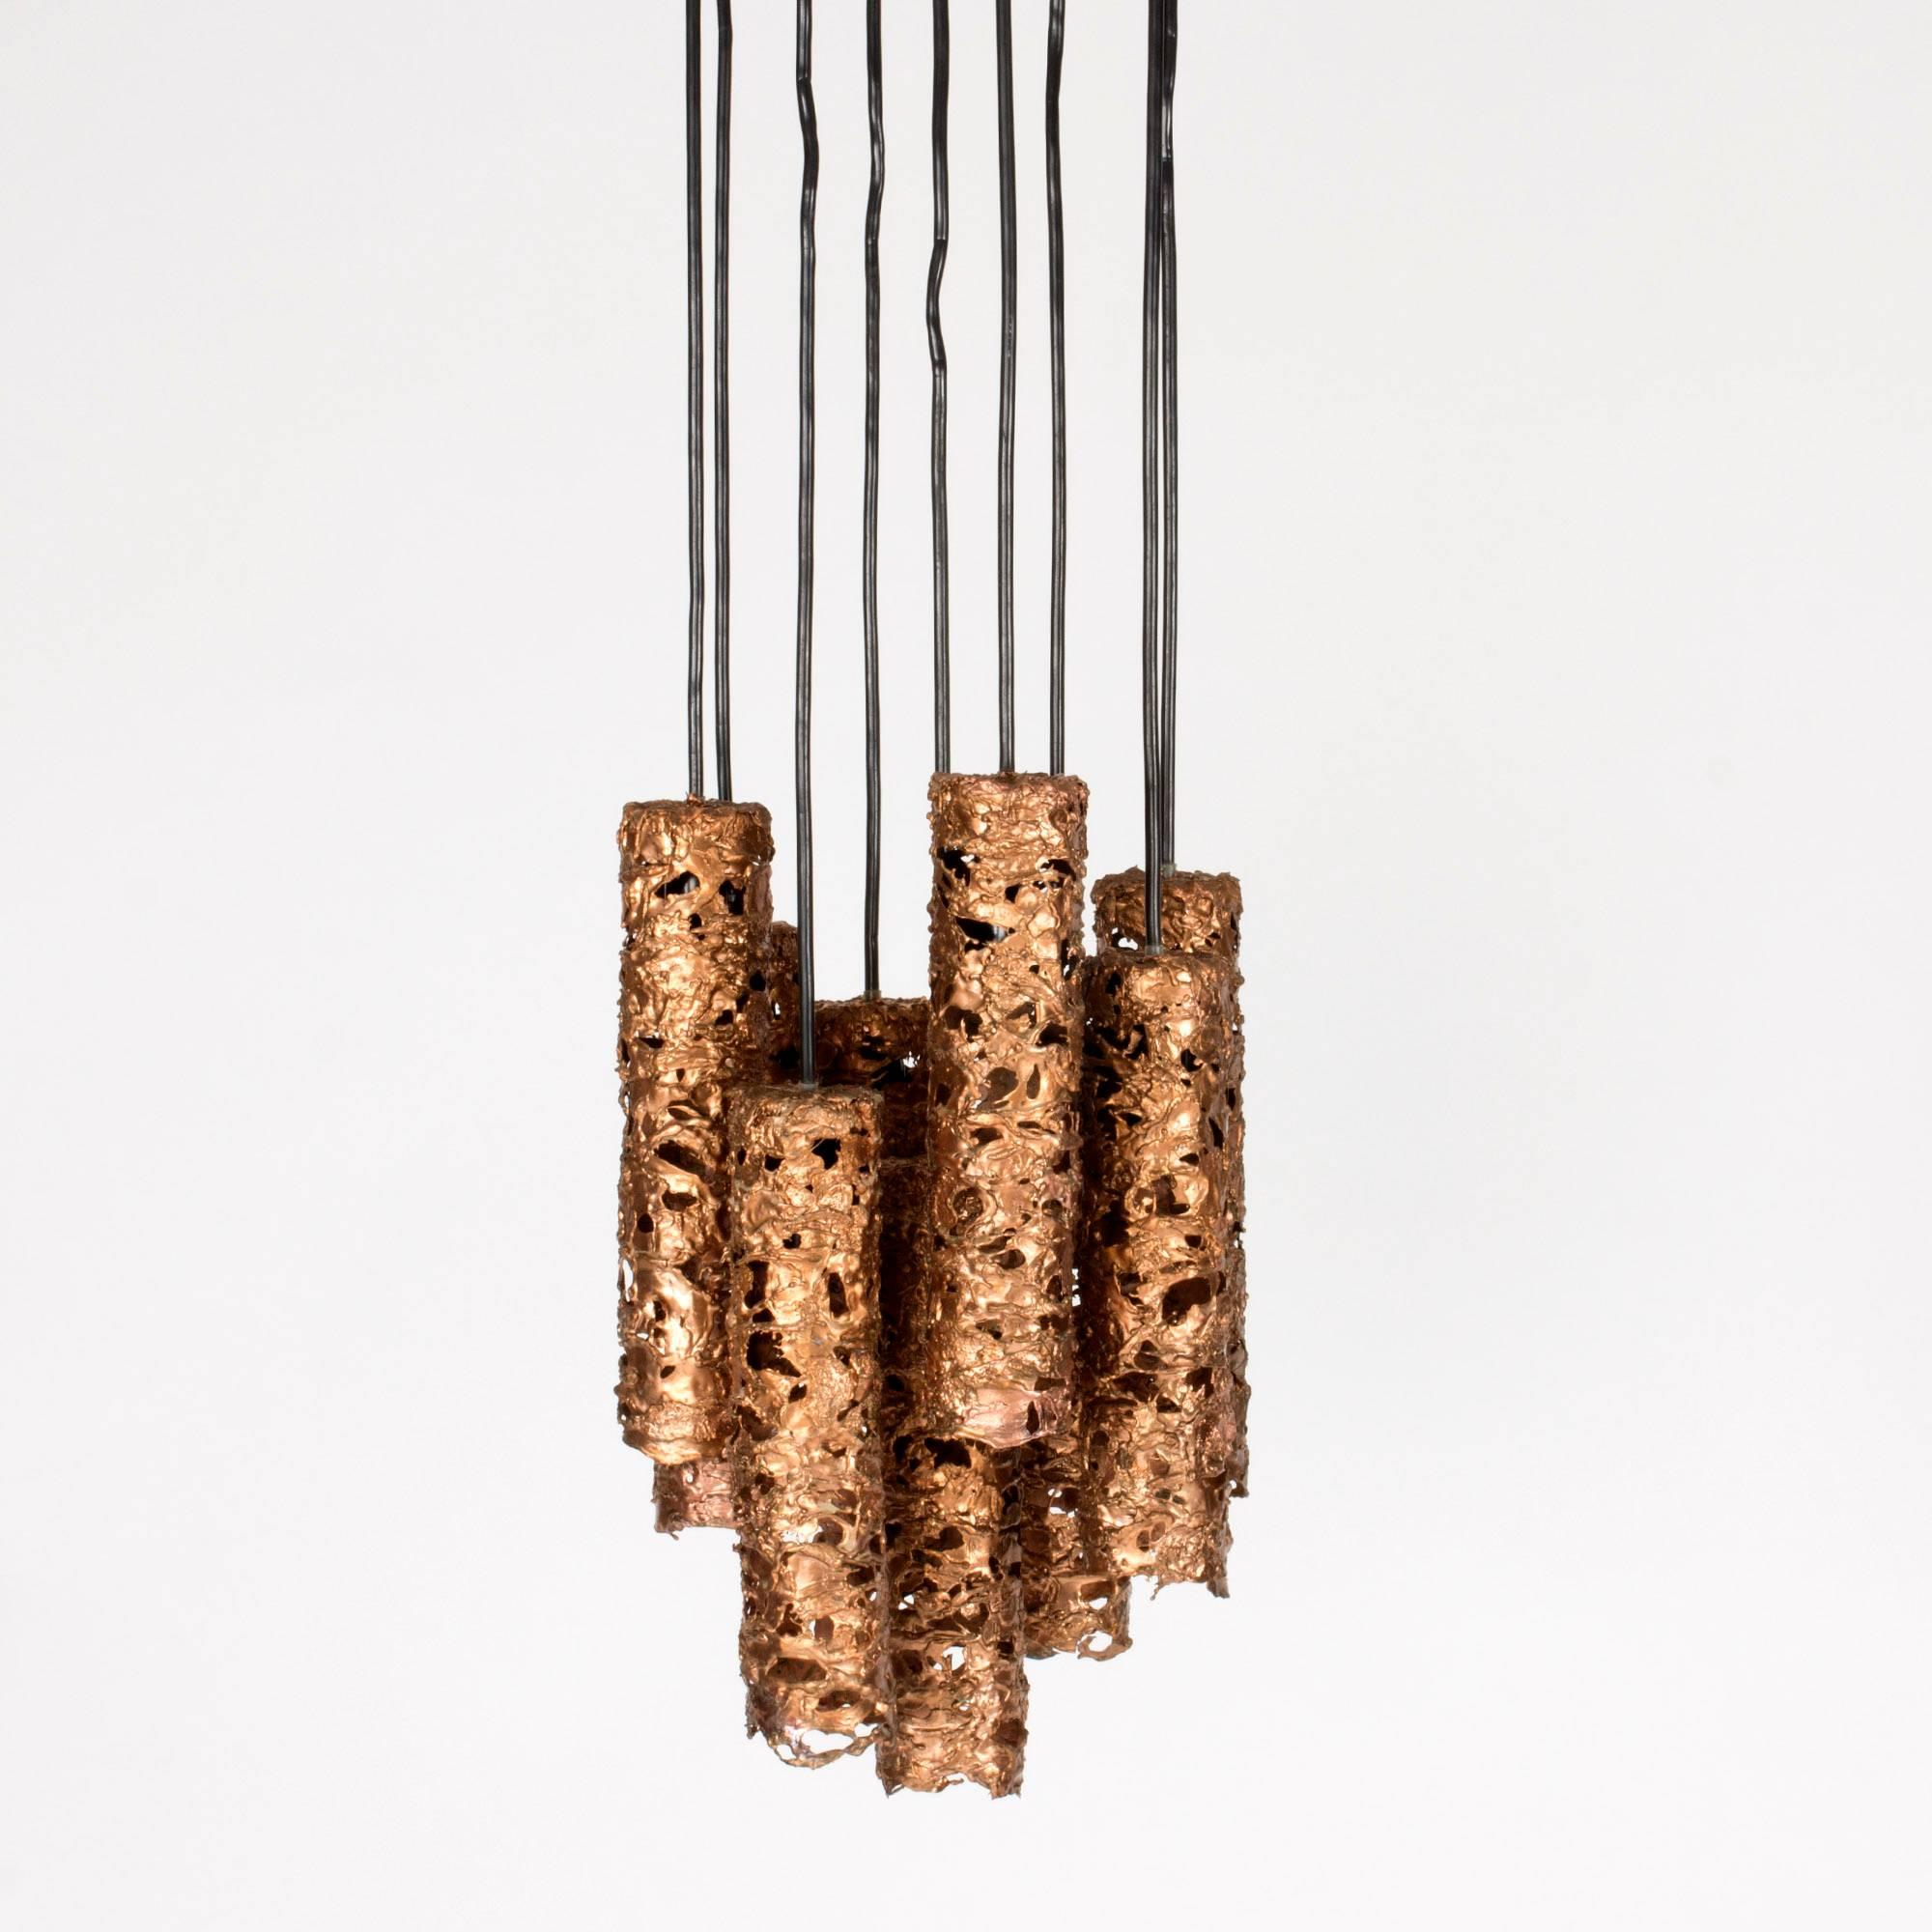 Awesome Swedish 1960s Brutalist pendant lamp, made from multiple cylindrical lamp shades suspended from a large cable cup in the same technique. The shades are made from shards of copper that let some light slip through the gaps between them.